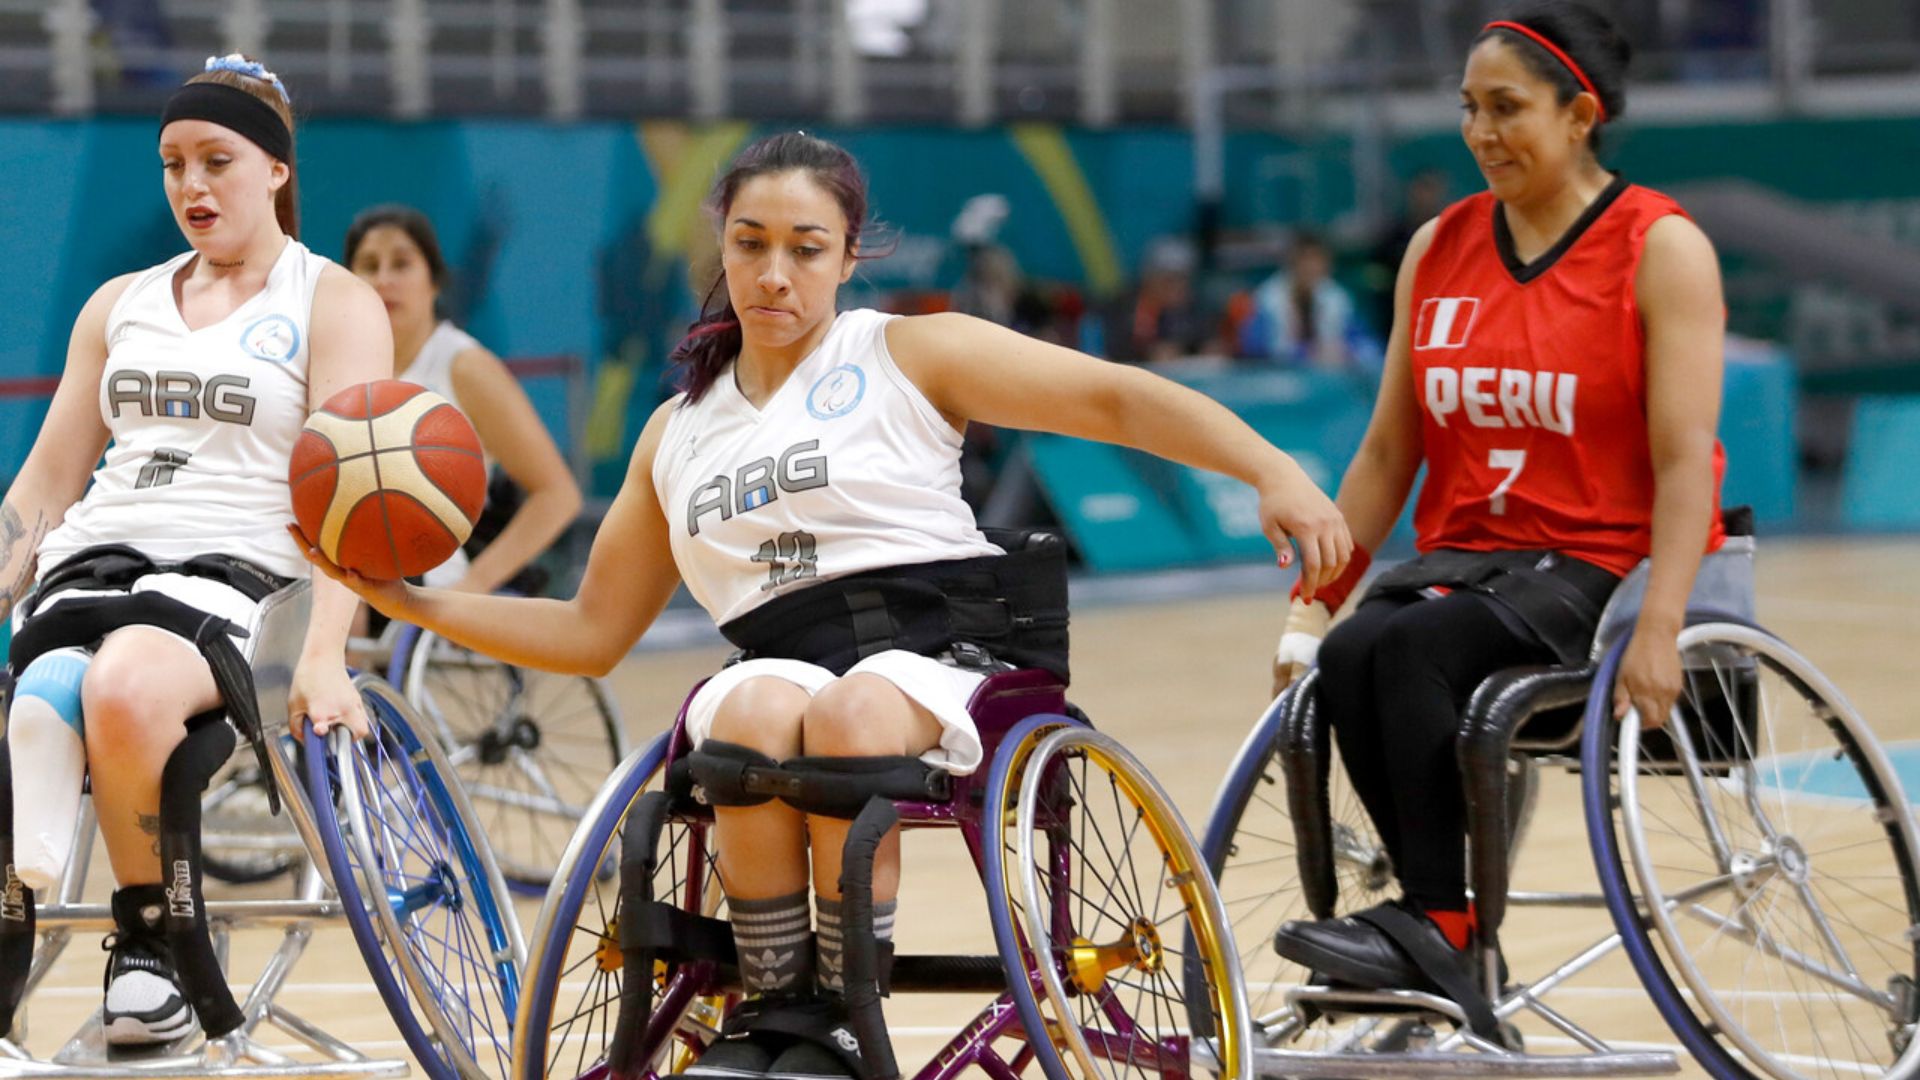 Argentina Claims Victory in Women's Wheelchair Basketball Too